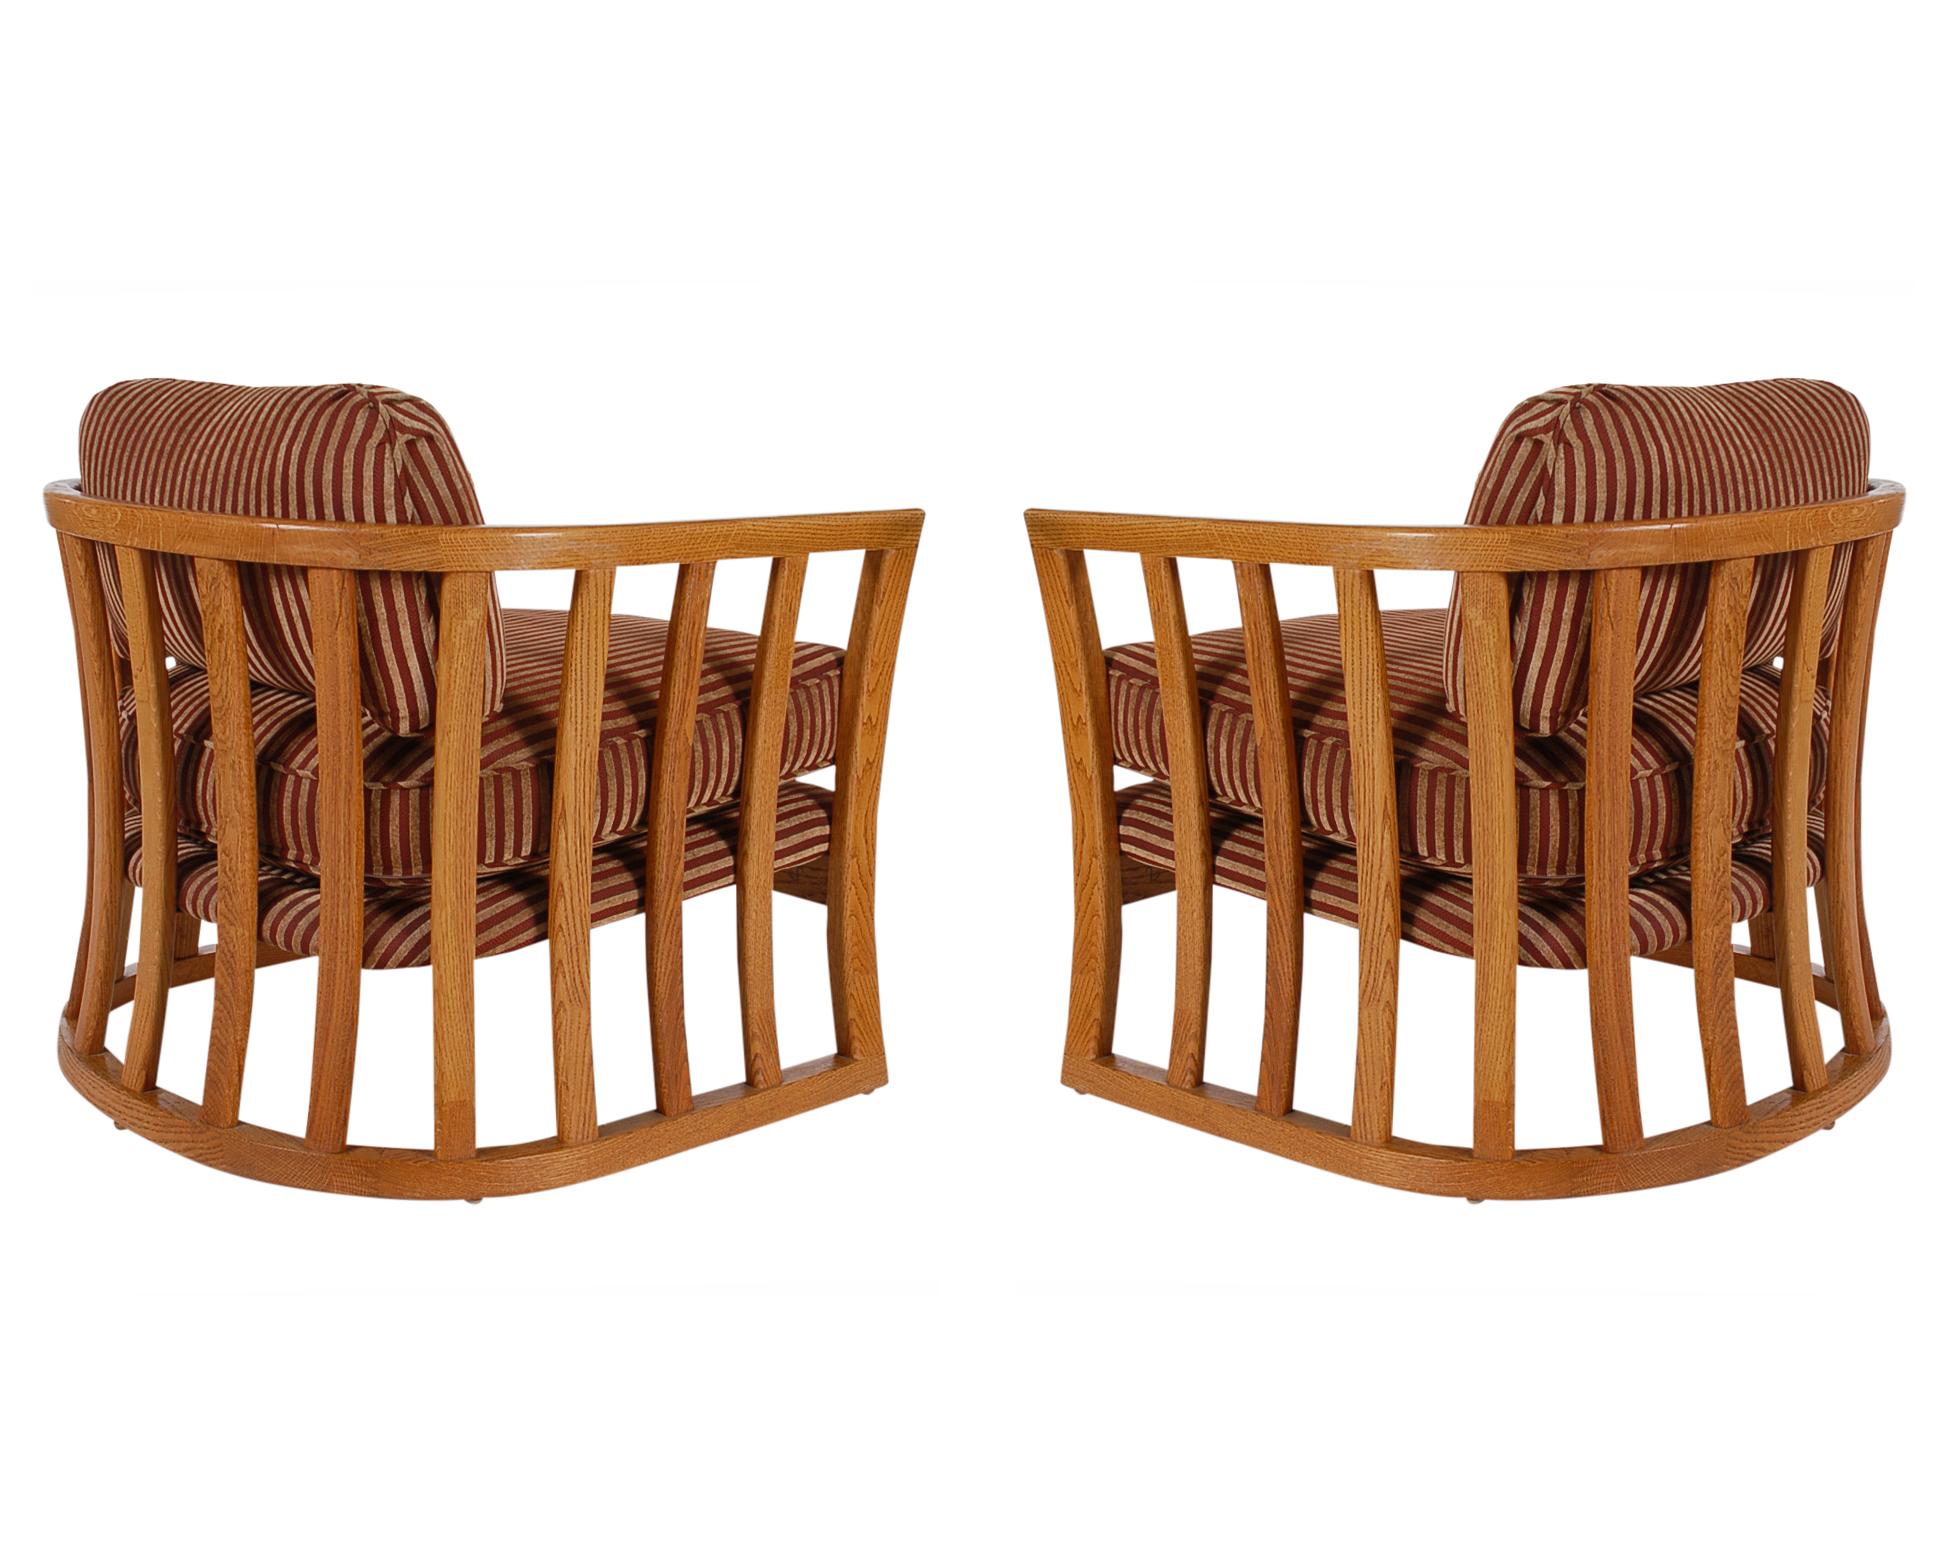 Late 20th Century Matching Pair of Mid-Century Modern Spindle Back Barrel Lounge Chairs in Oak For Sale